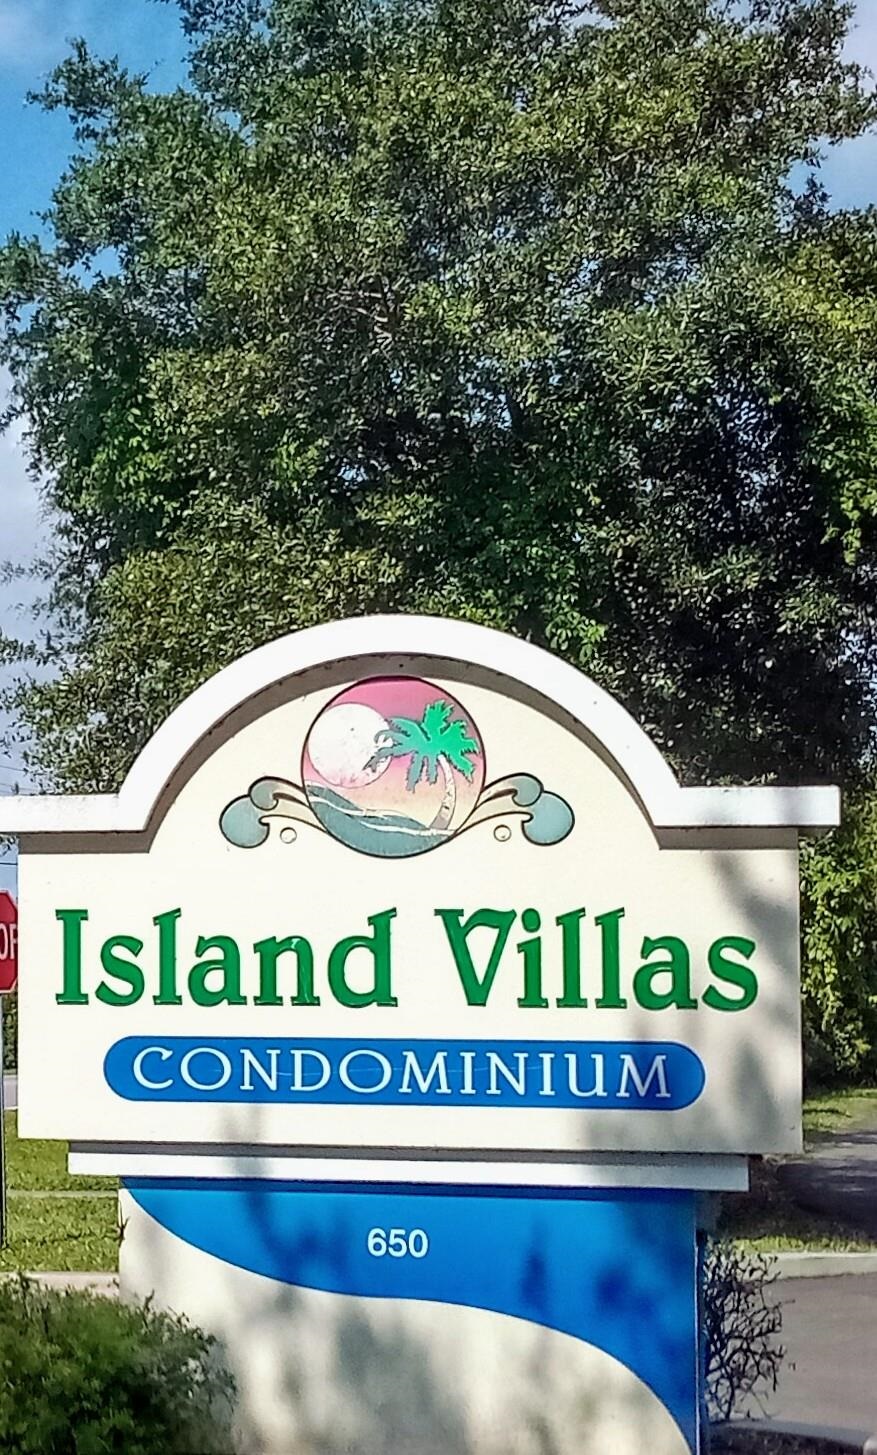 Bright and Sunny Anastasia Island Ground floor condo under 240k! This Island Villa has 2 bedrooms and 2 full baths .Tile and vinyl plank flooring thru-out .Easy walk/or bike to Beaches and Shops. Community Swimming Pool and Pond with fountain  for a peaceful Island Vibes- 1 Year new AC/ compressor